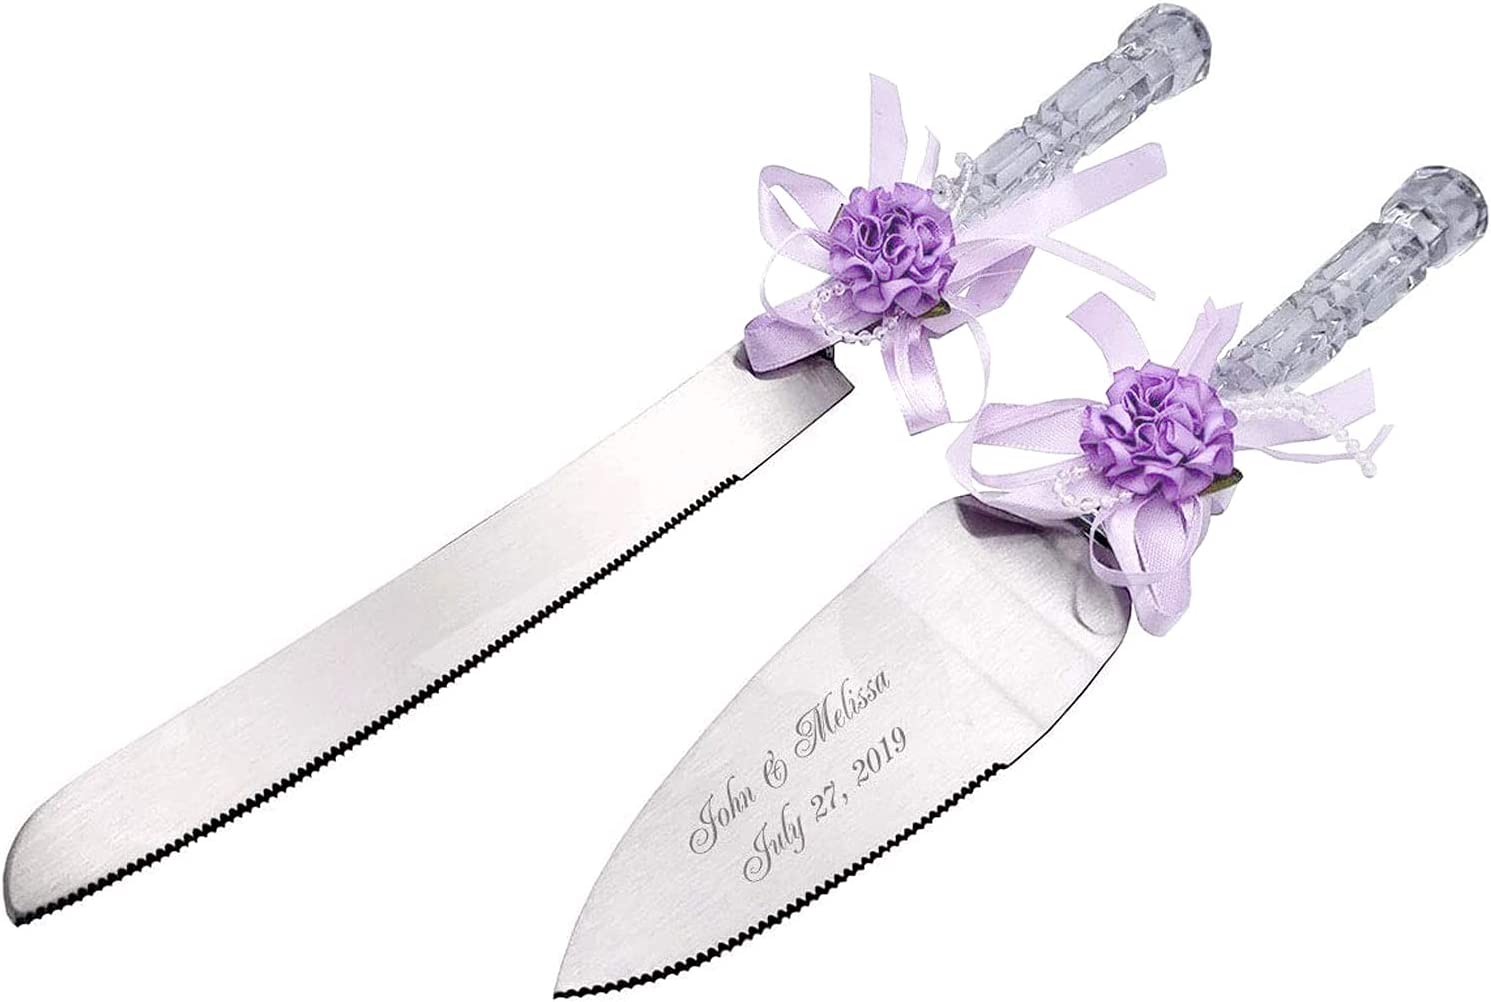 Gifts Infinity Personalized Wedding Cake Knife and Server Set Free Engraving Purple Bow